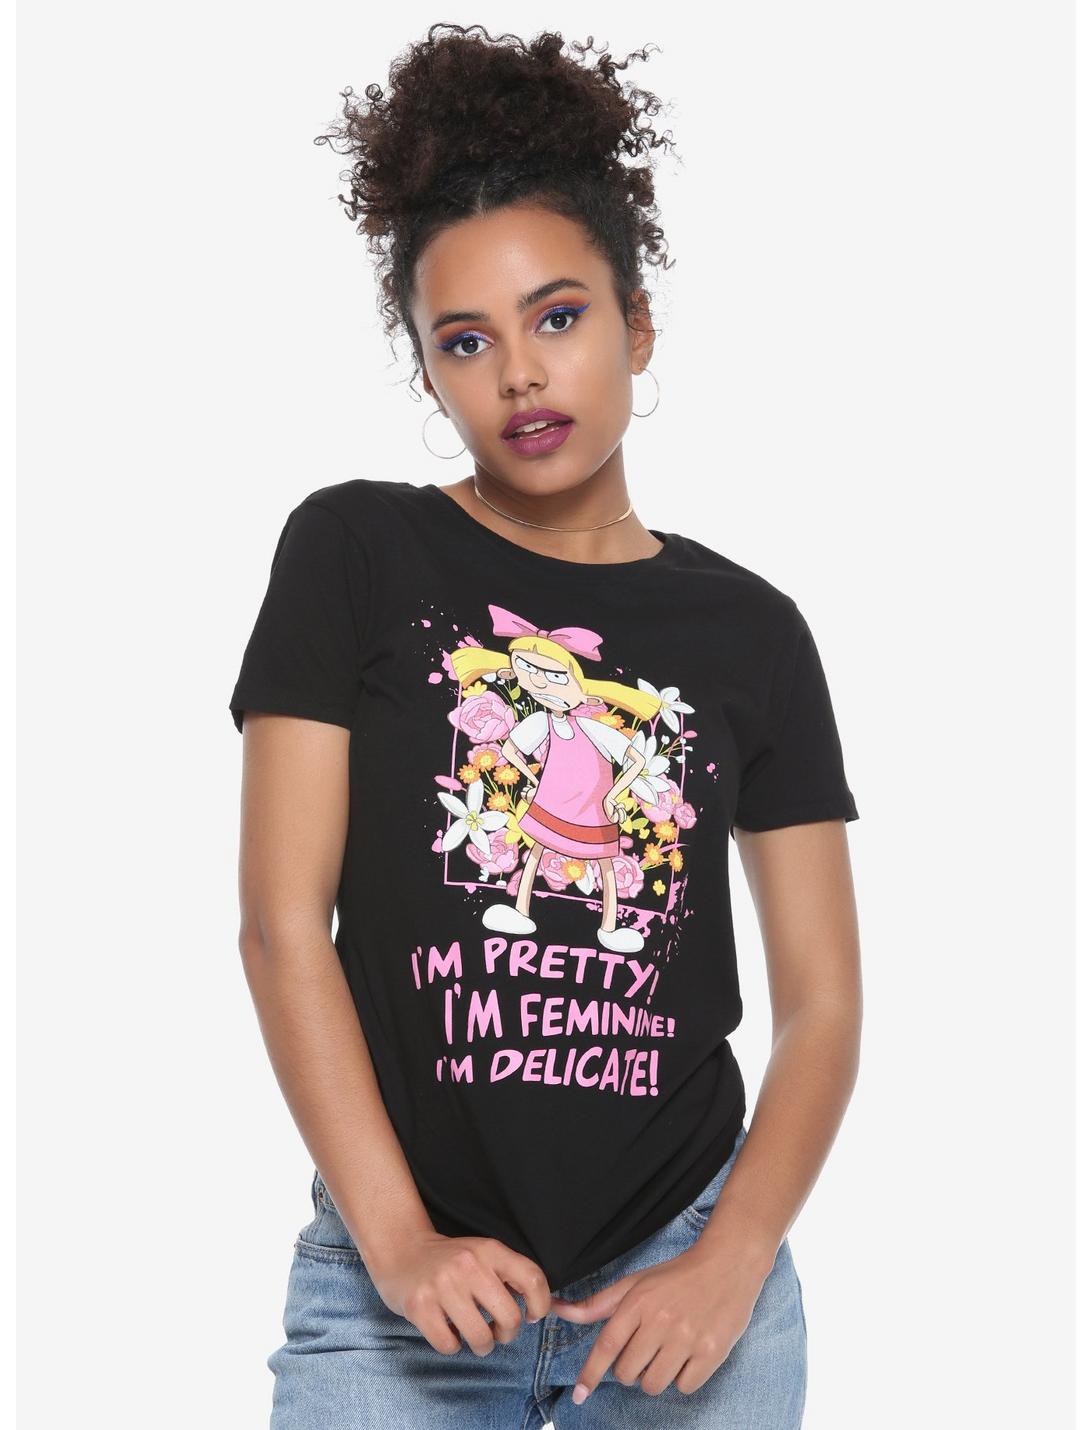 Hey Arnold! Helga I Am Too A Girl Girls T-Shirt Hot Topic Exclusive, GREY, hi-res